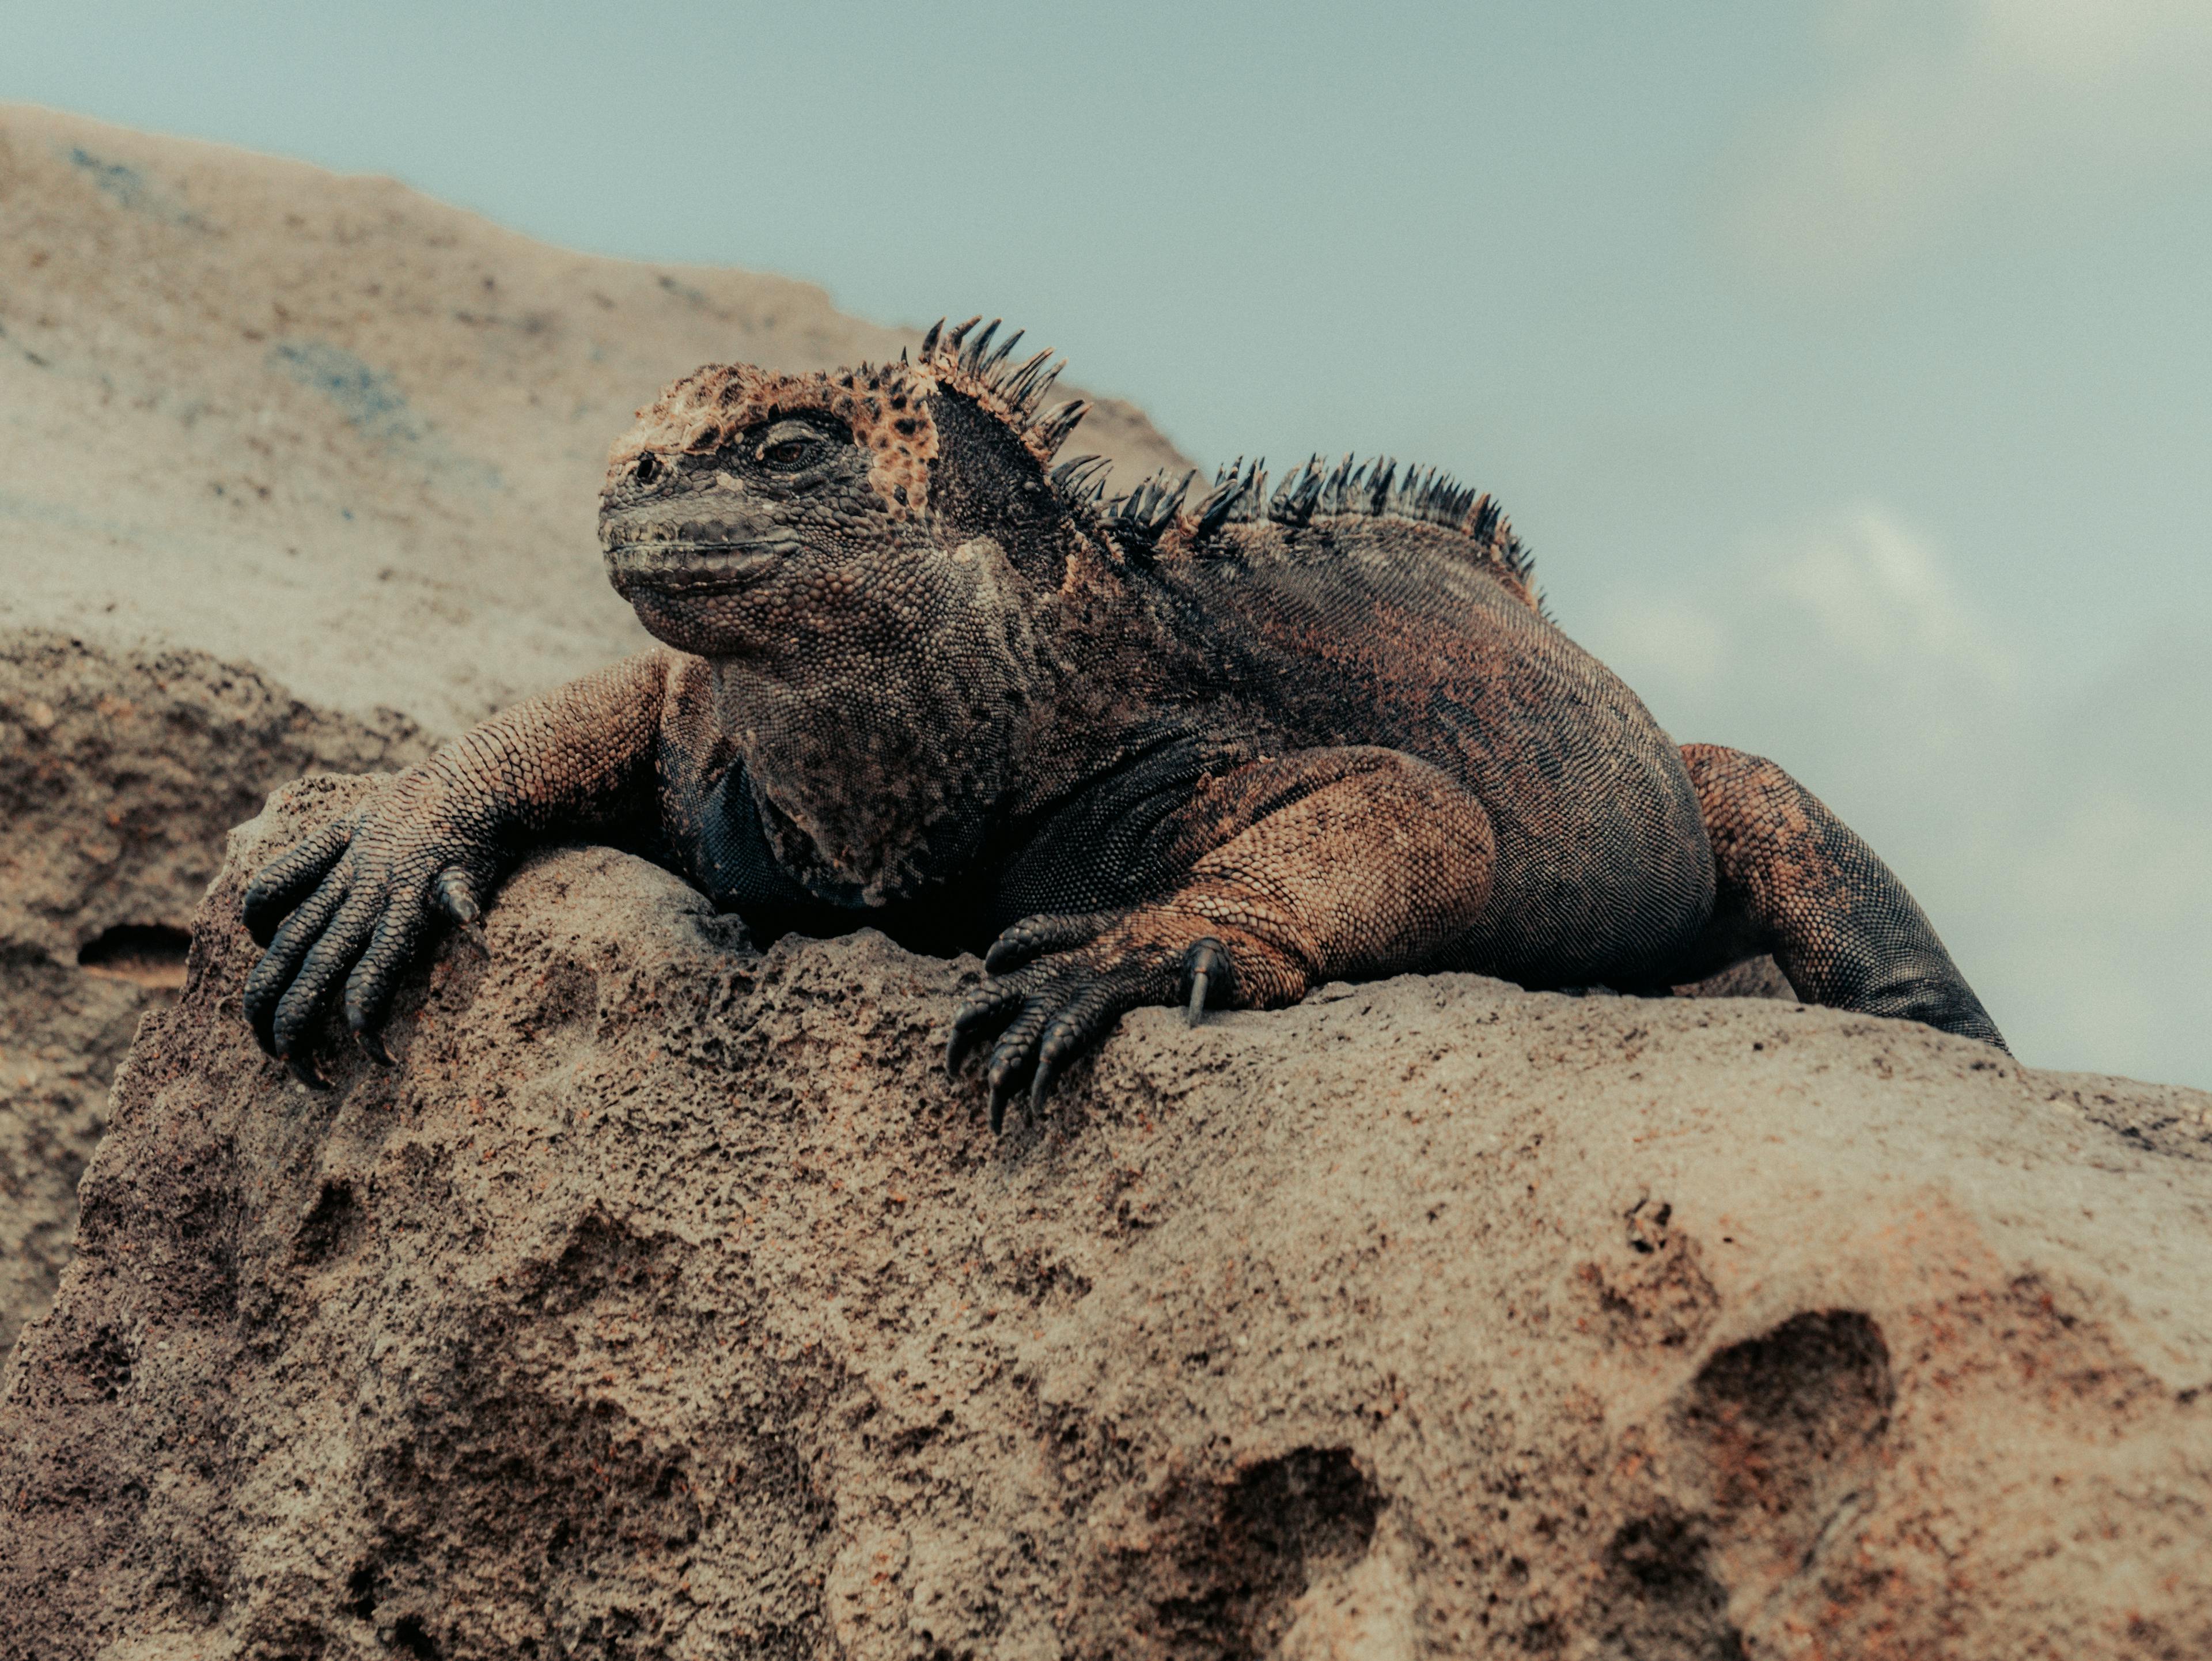 Learn more about the Marine Iguana